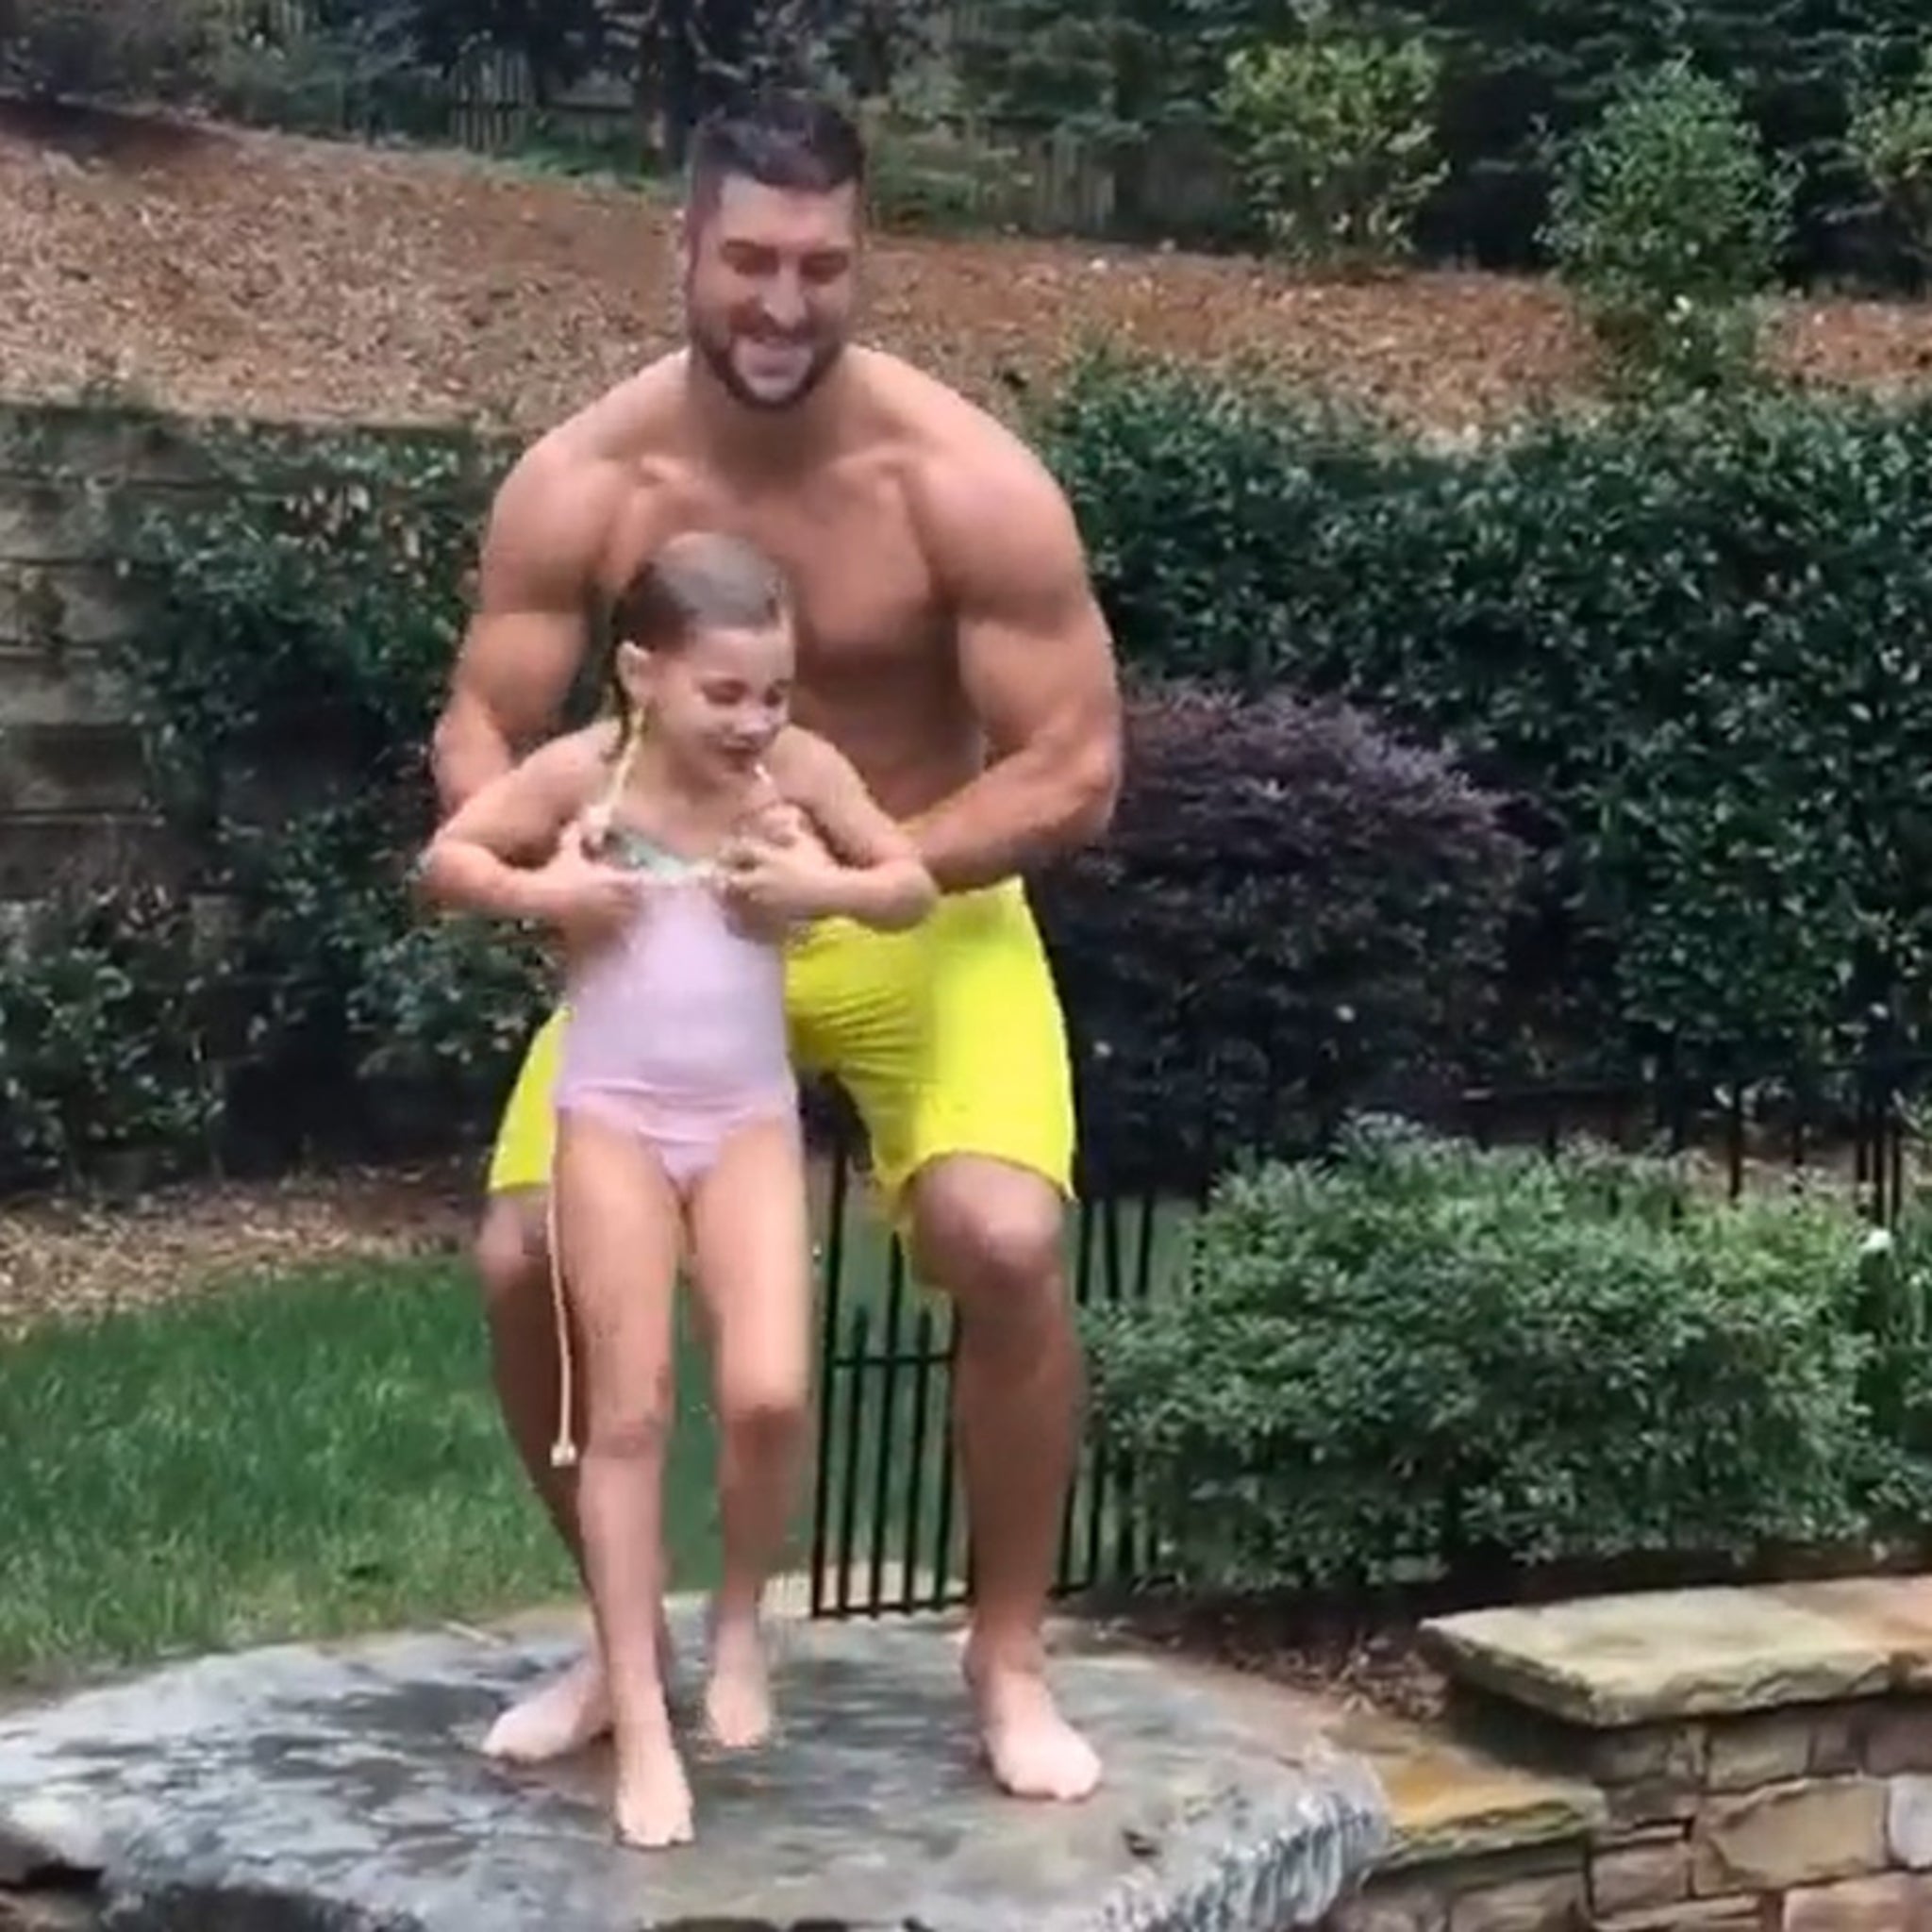 Tim Tebow -- Jacked, Shirtless, Tossing Children (VIDEO)